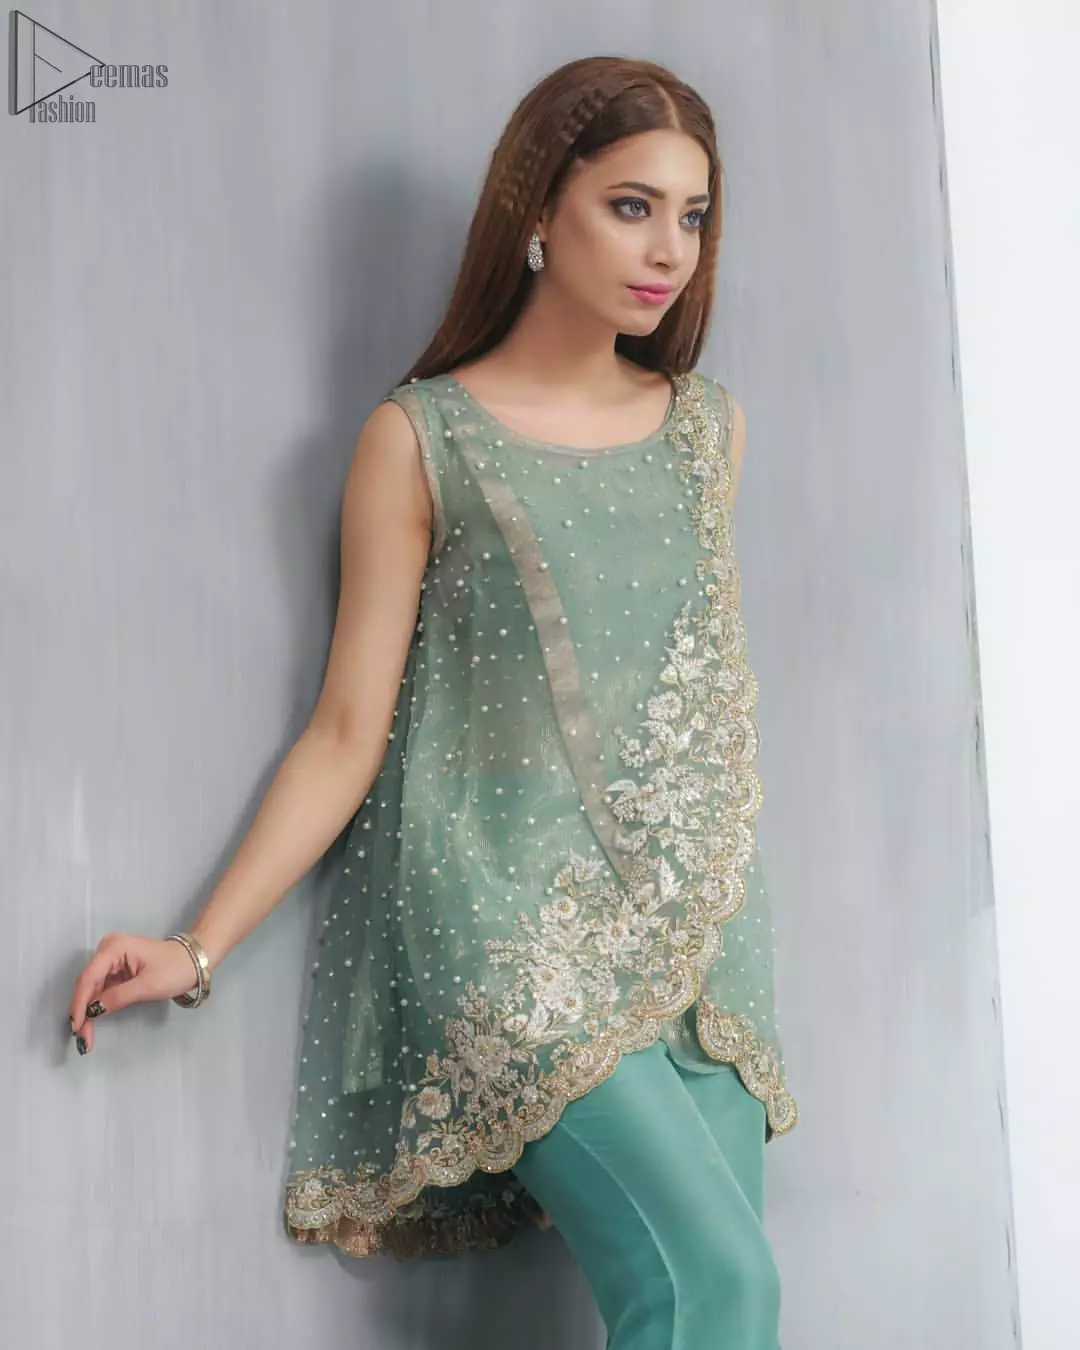 This outfit should be the next addition to your wardrobe. Gussy up the glamour with this intricately embroidered Sea Green ensemble accentuated with floral motifs and finished with scalp borders. An example of beauty and elegance. Look breathtakingly stylish in this embroidered regalia furnished. 